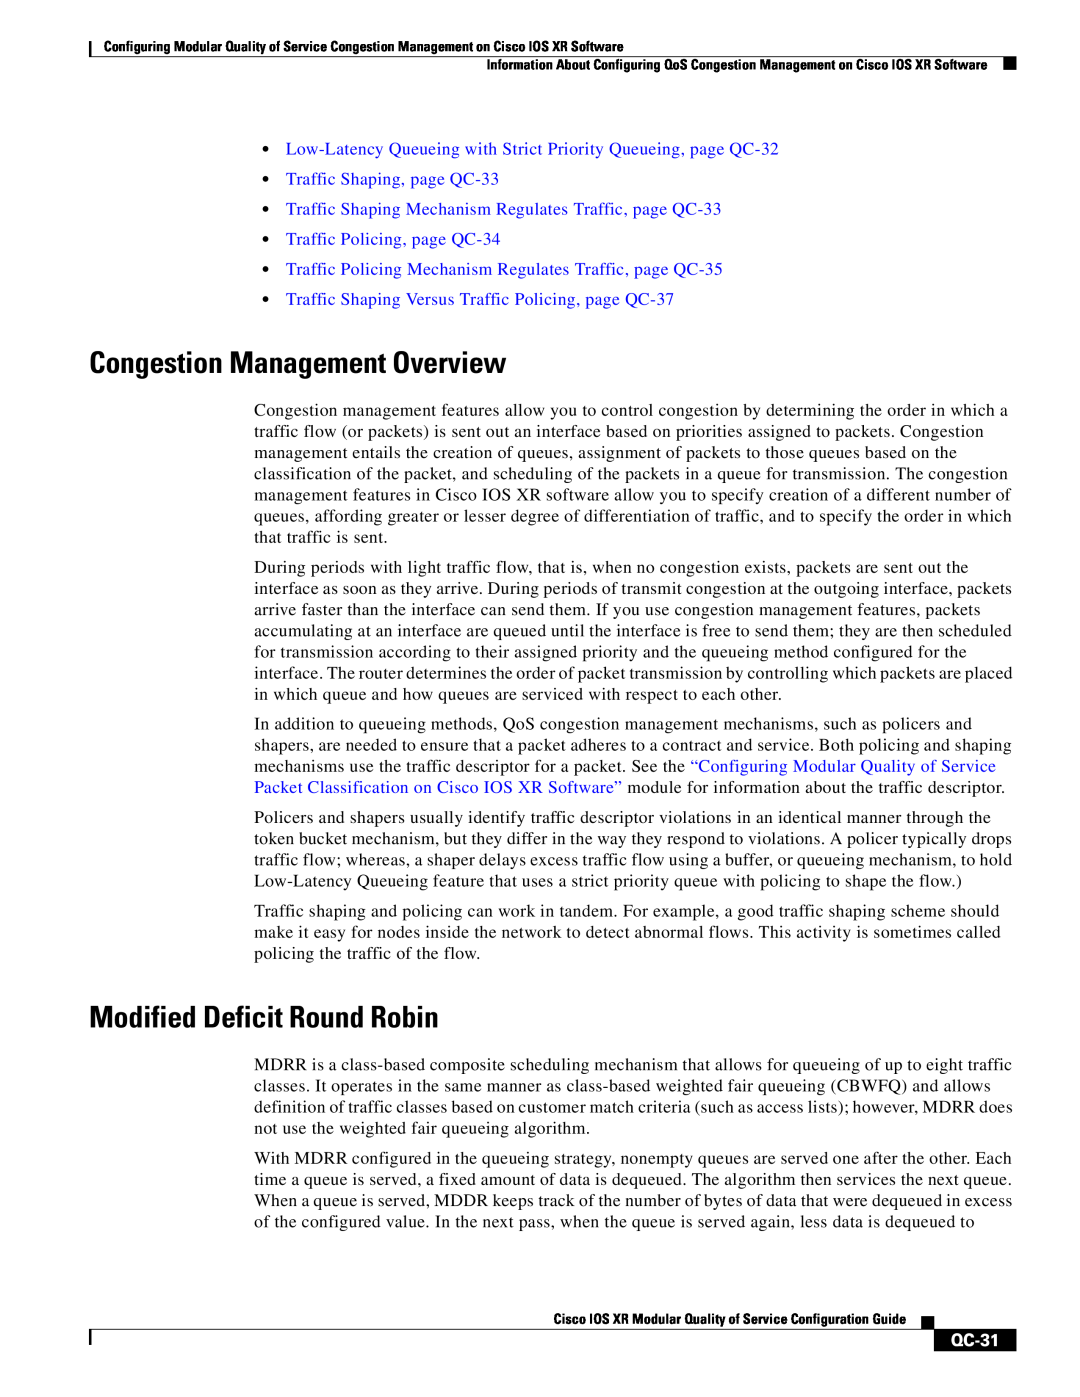 Cisco Systems QC-29 manual Congestion Management Overview, Modified Deficit Round Robin, Traffic Shaping, page QC-33, QC-31 